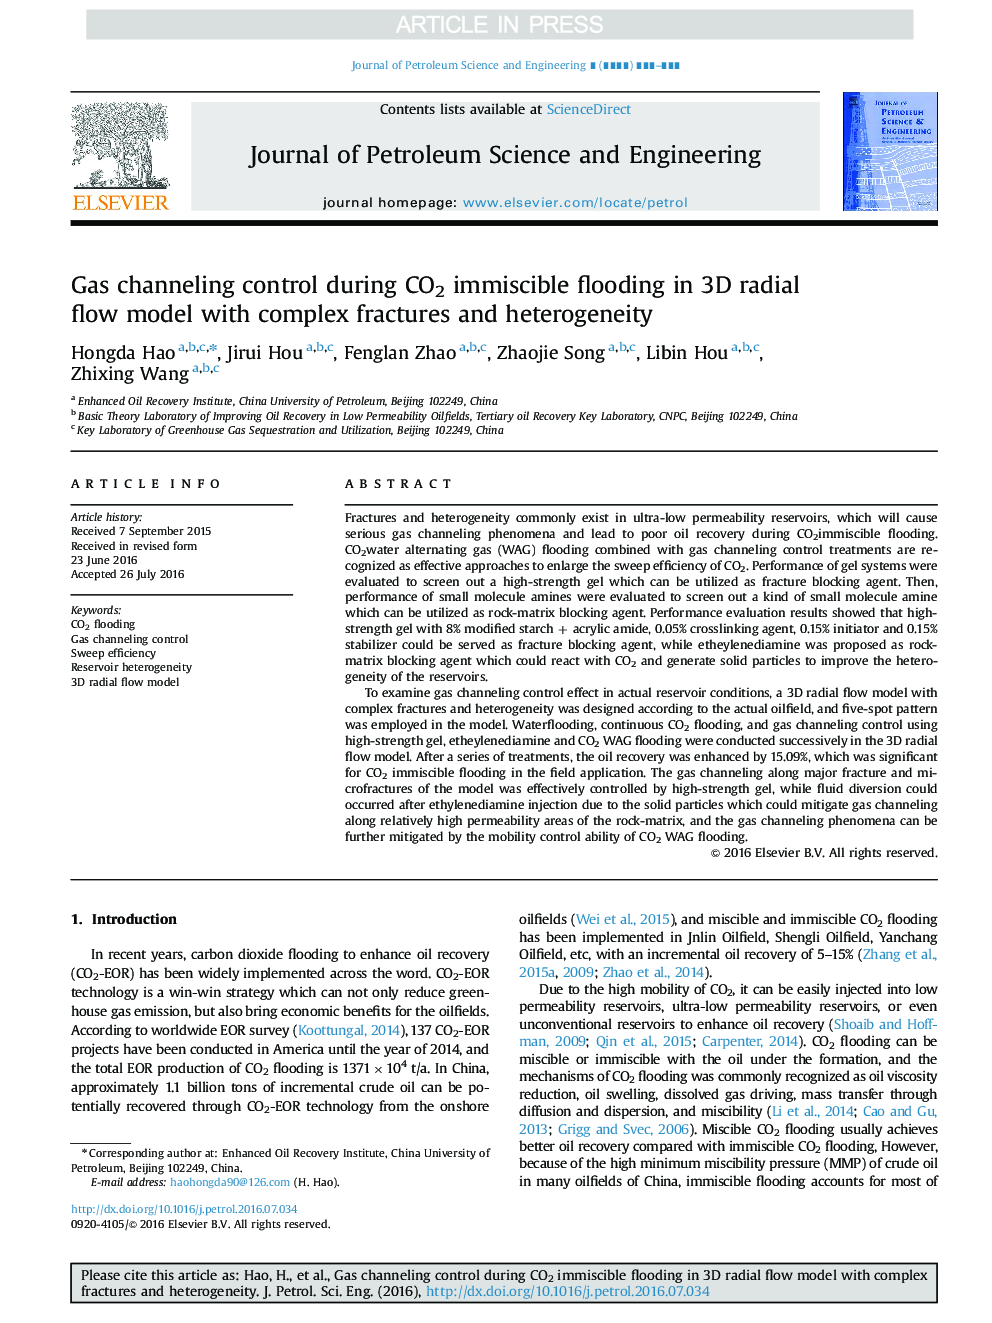 Gas channeling control during CO2 immiscible flooding in 3D radial flow model with complex fractures and heterogeneity